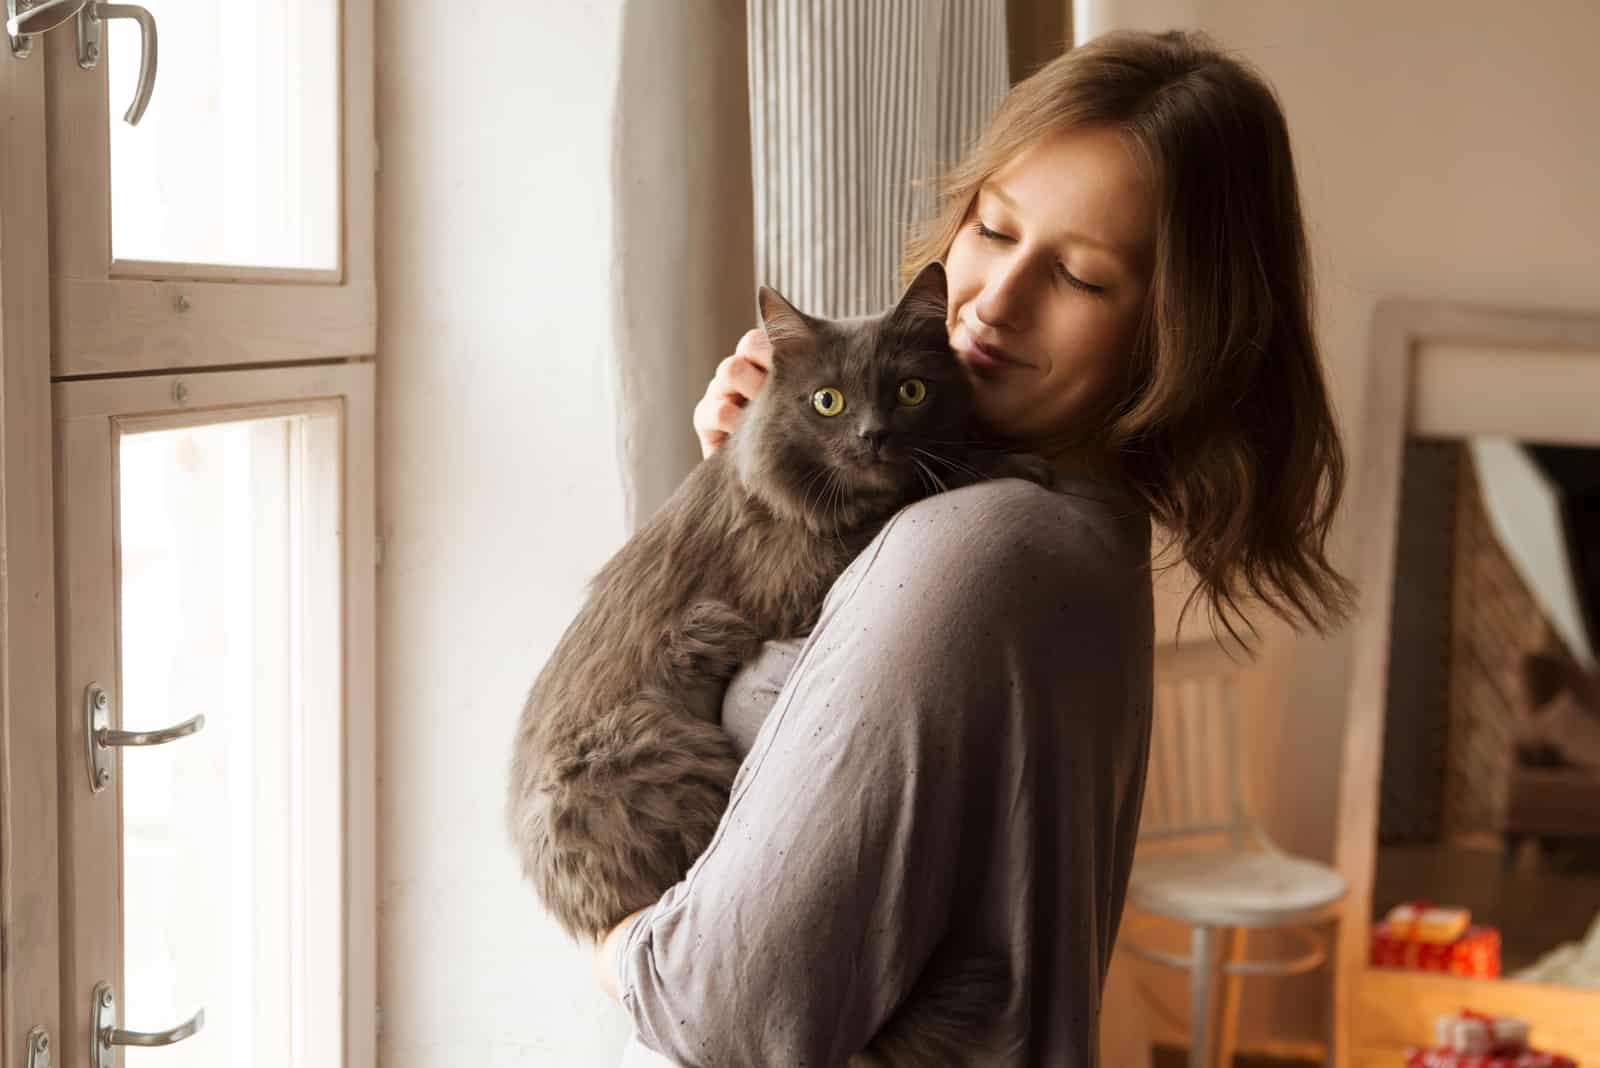 Young woman playing with cat in home